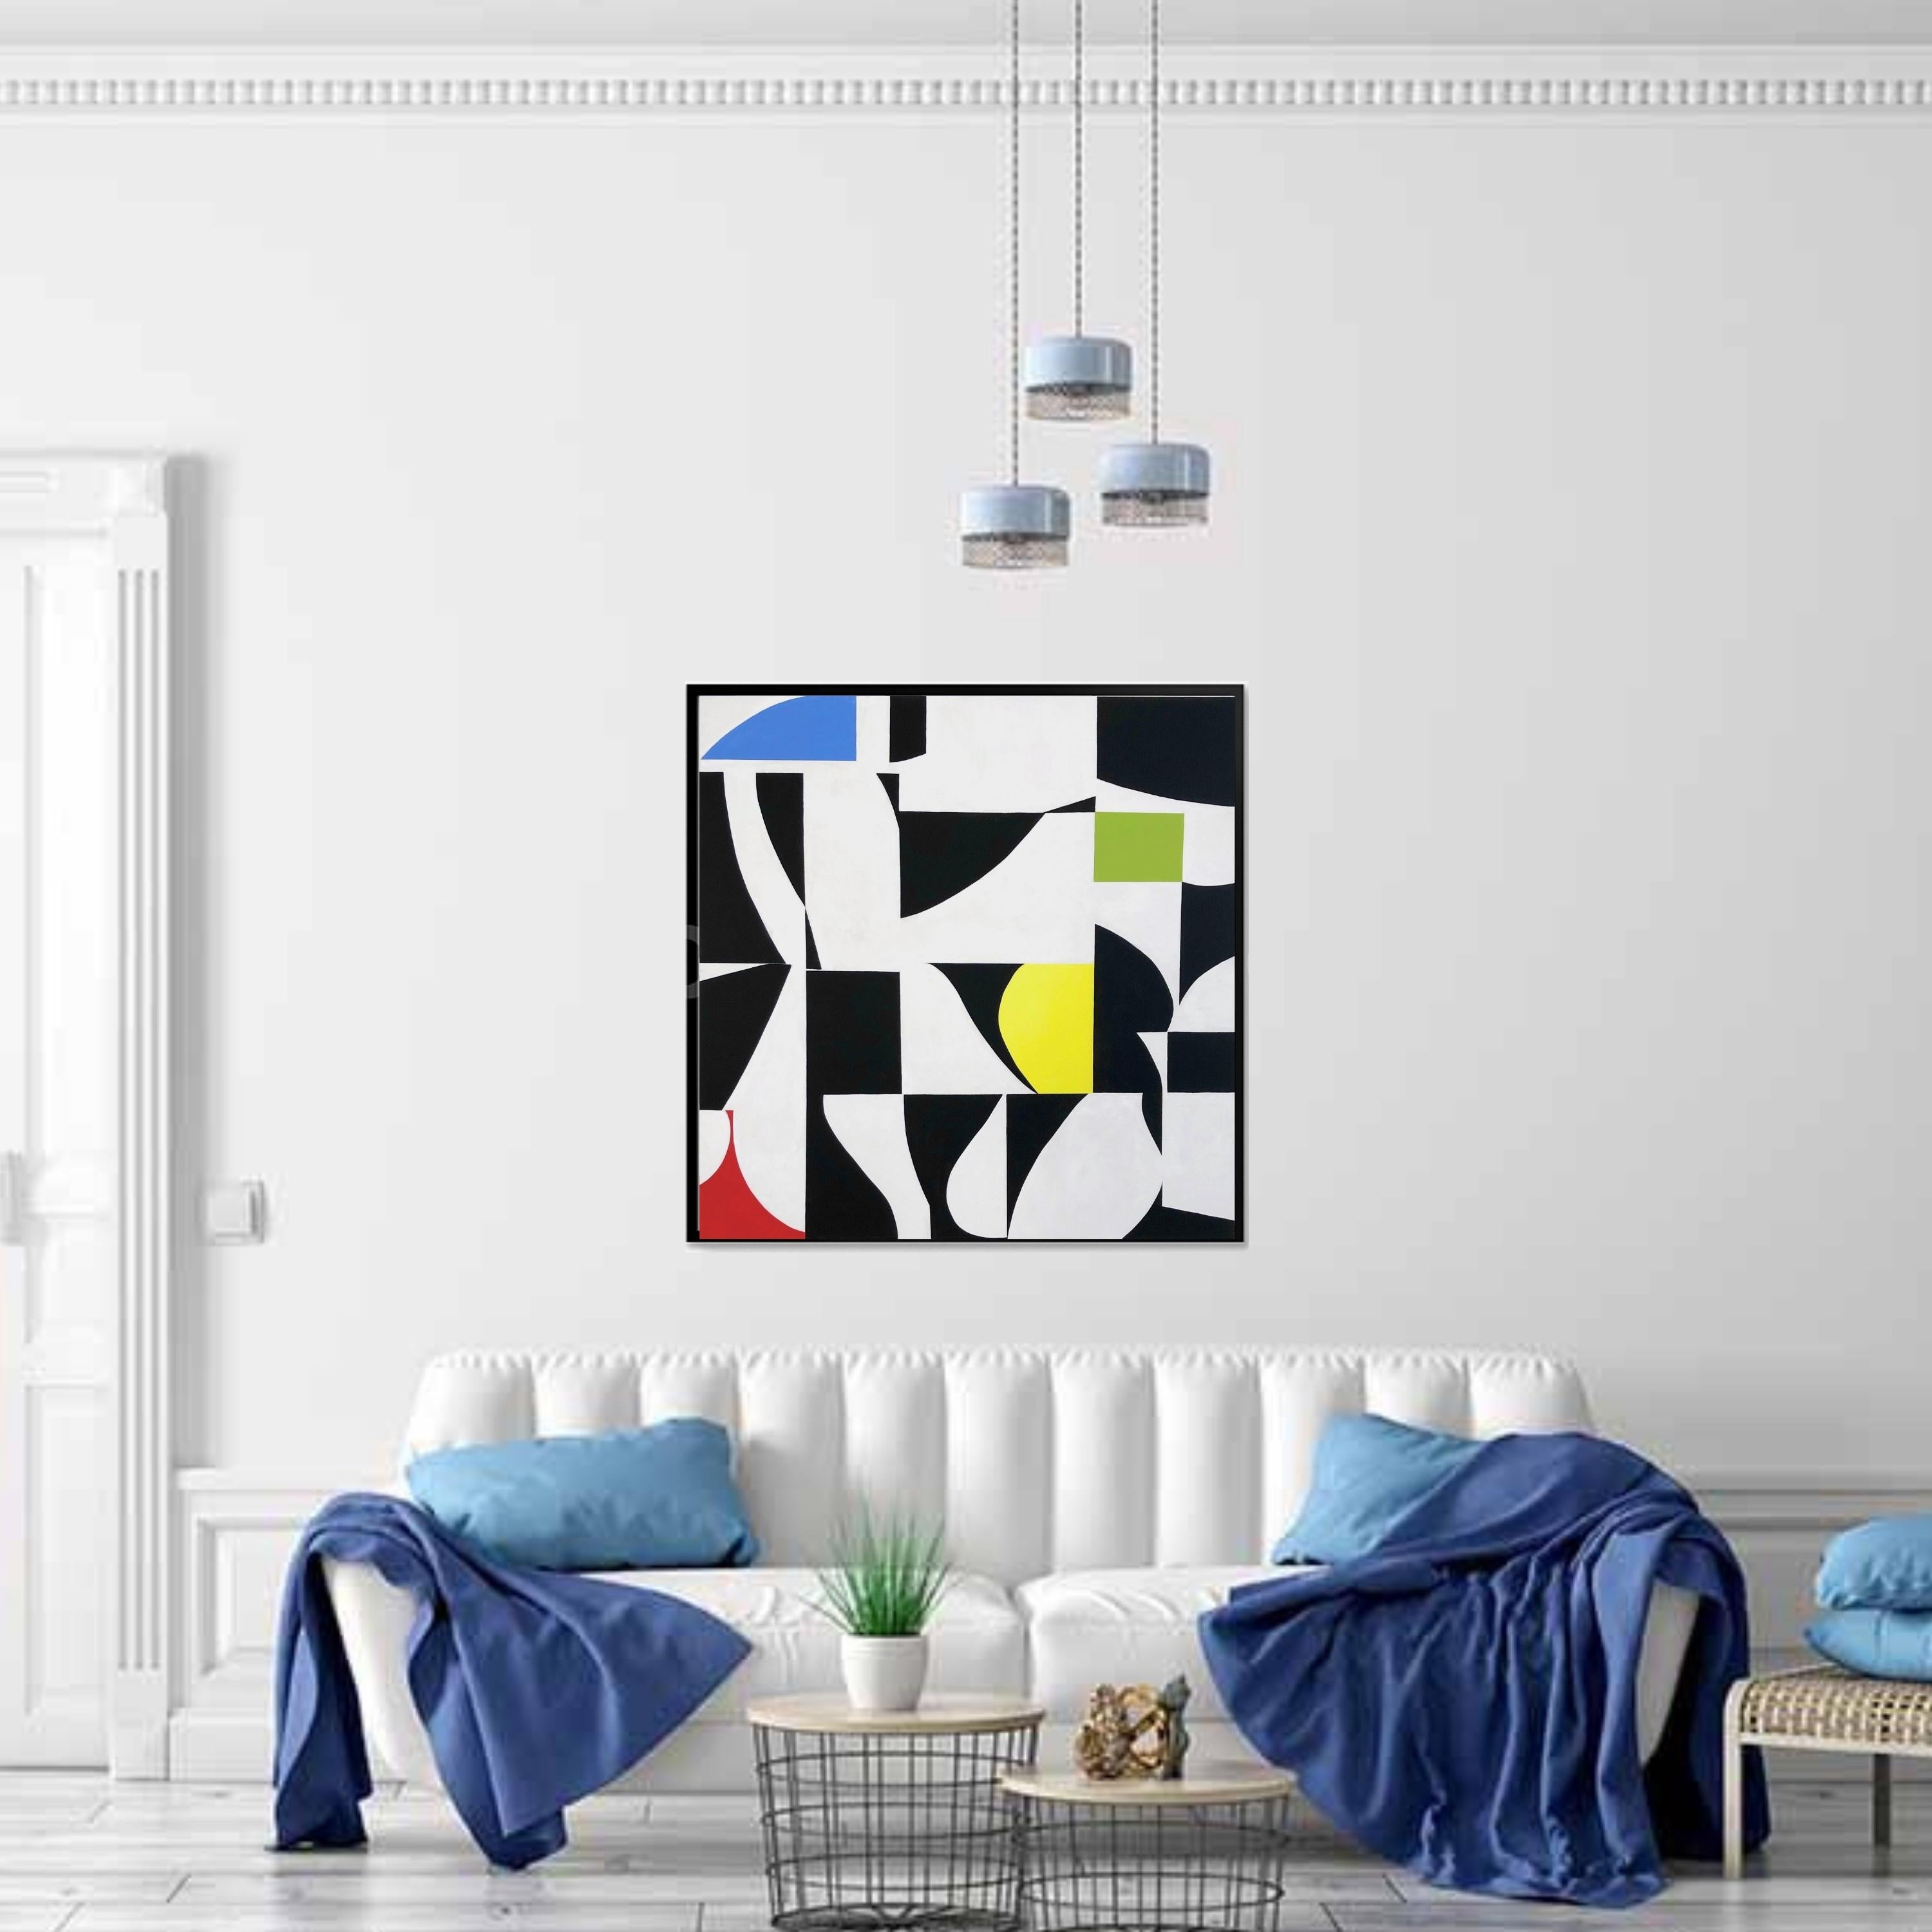 Geometric Abstraction 45 - Painting by Anna Medvedeva